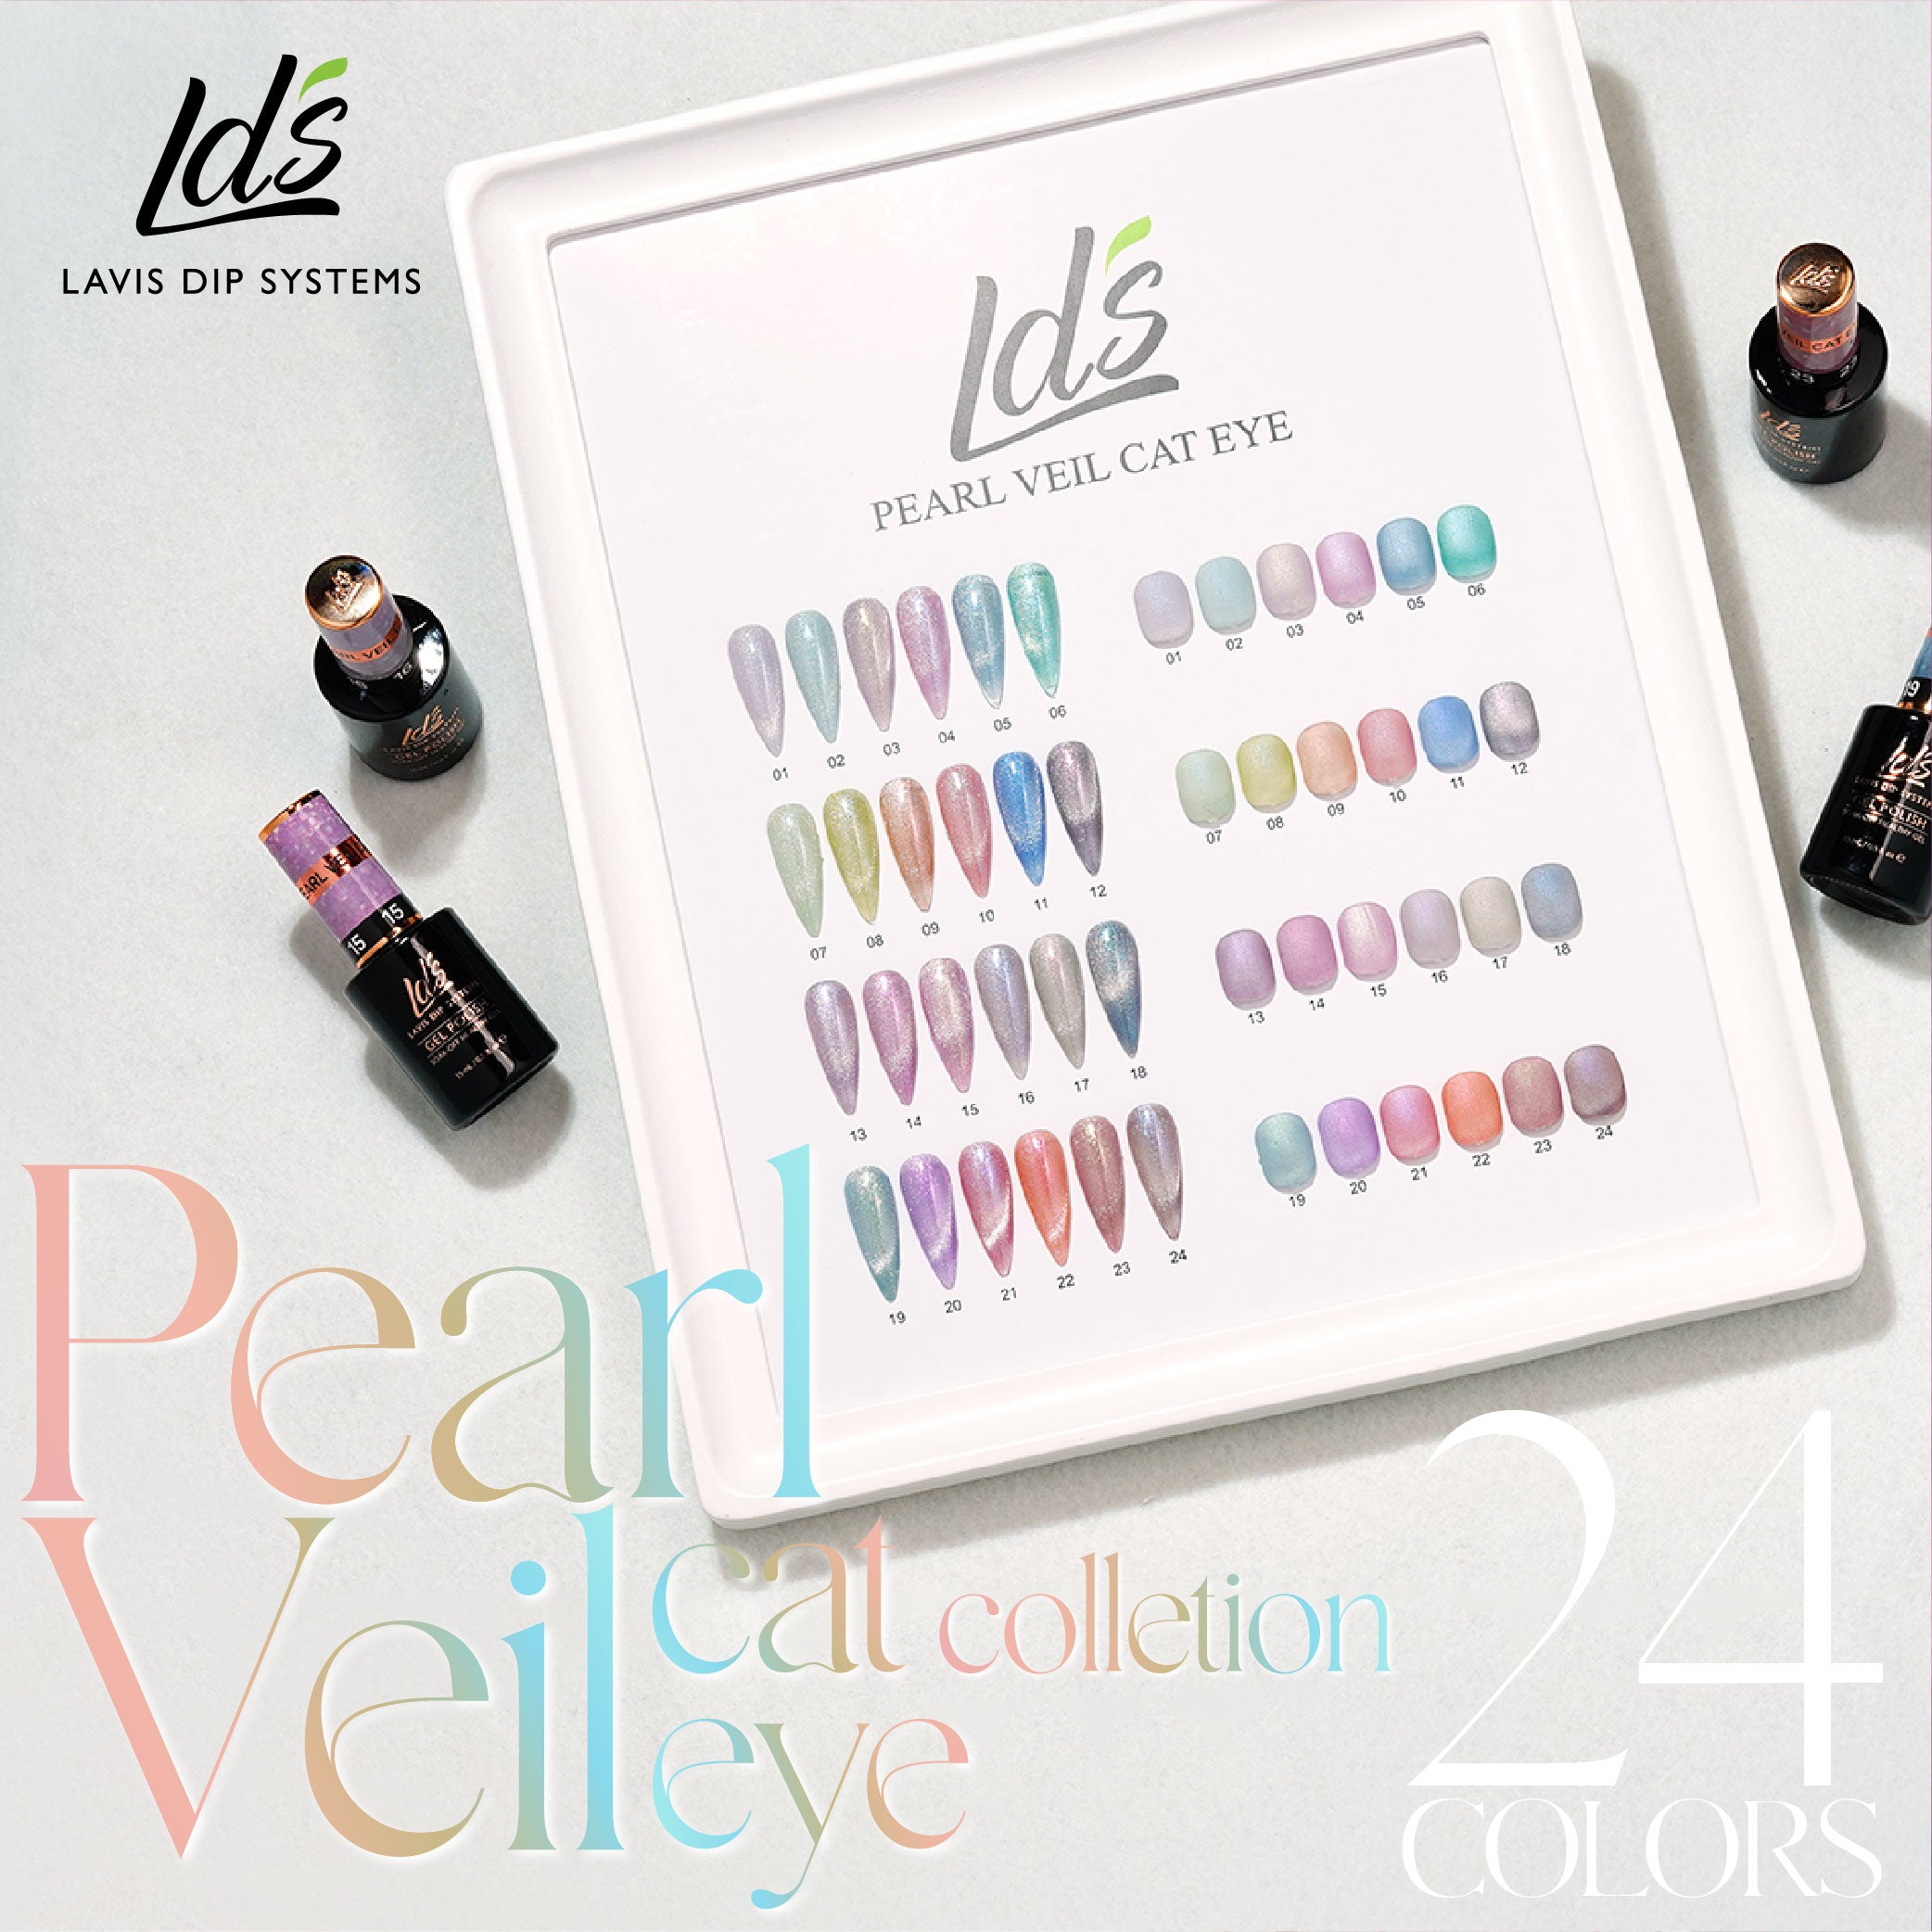 LDS Pearl CE - 03 - Pearl Veil Cat Eye Collection